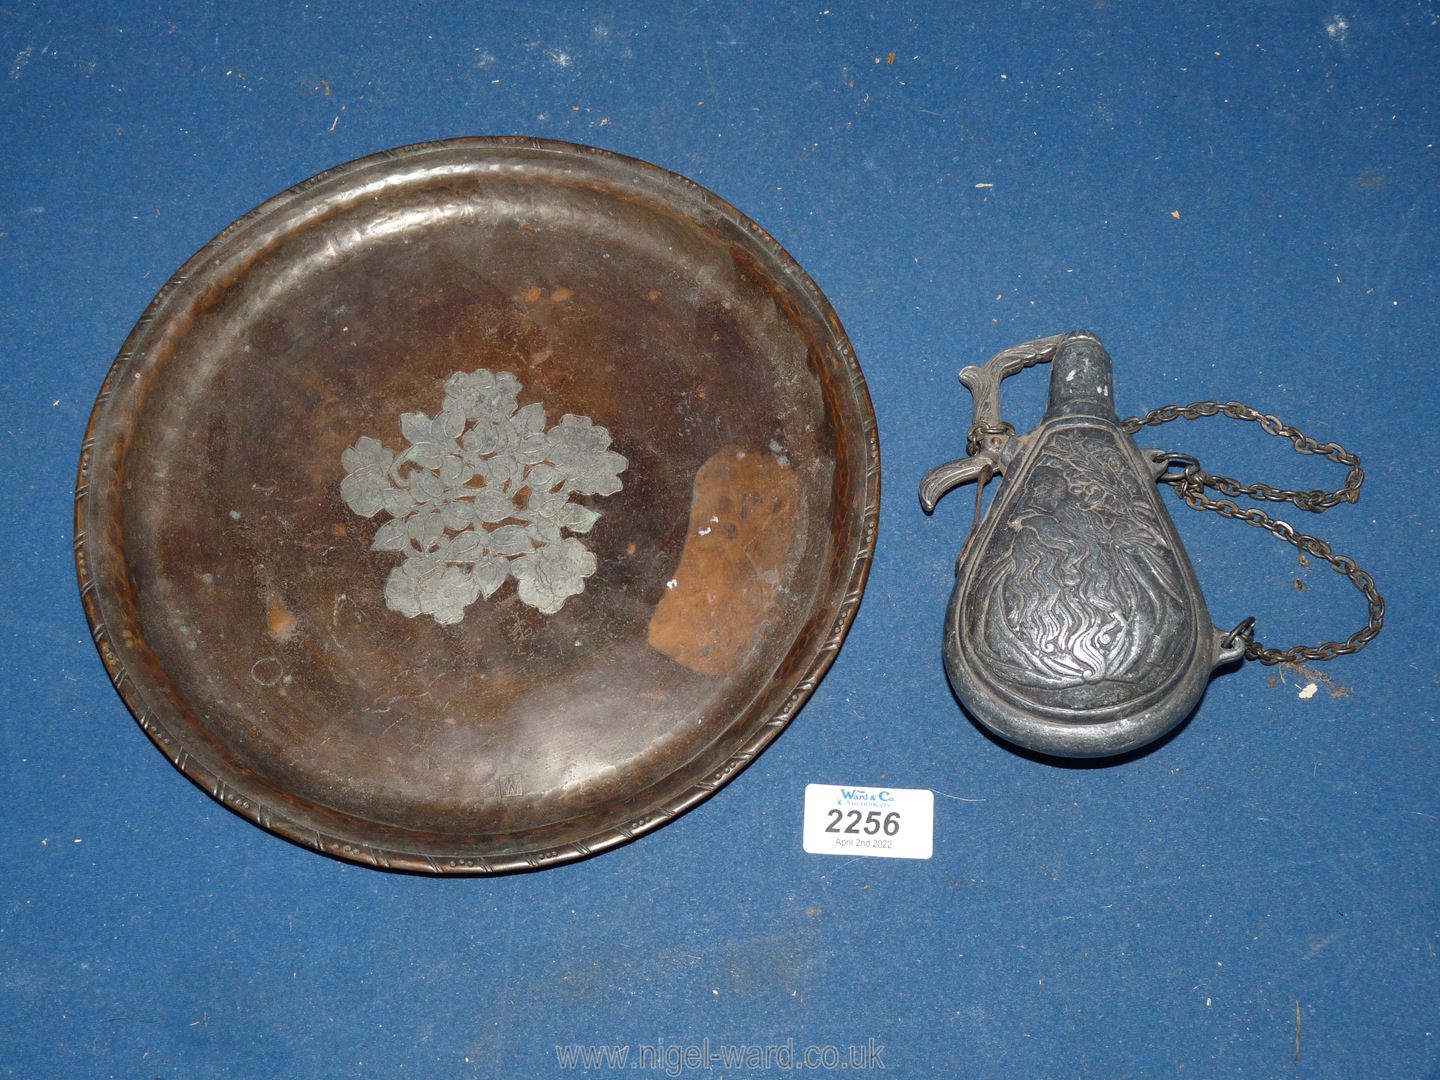 An embossed copper plate and a pewter gun powder flask.